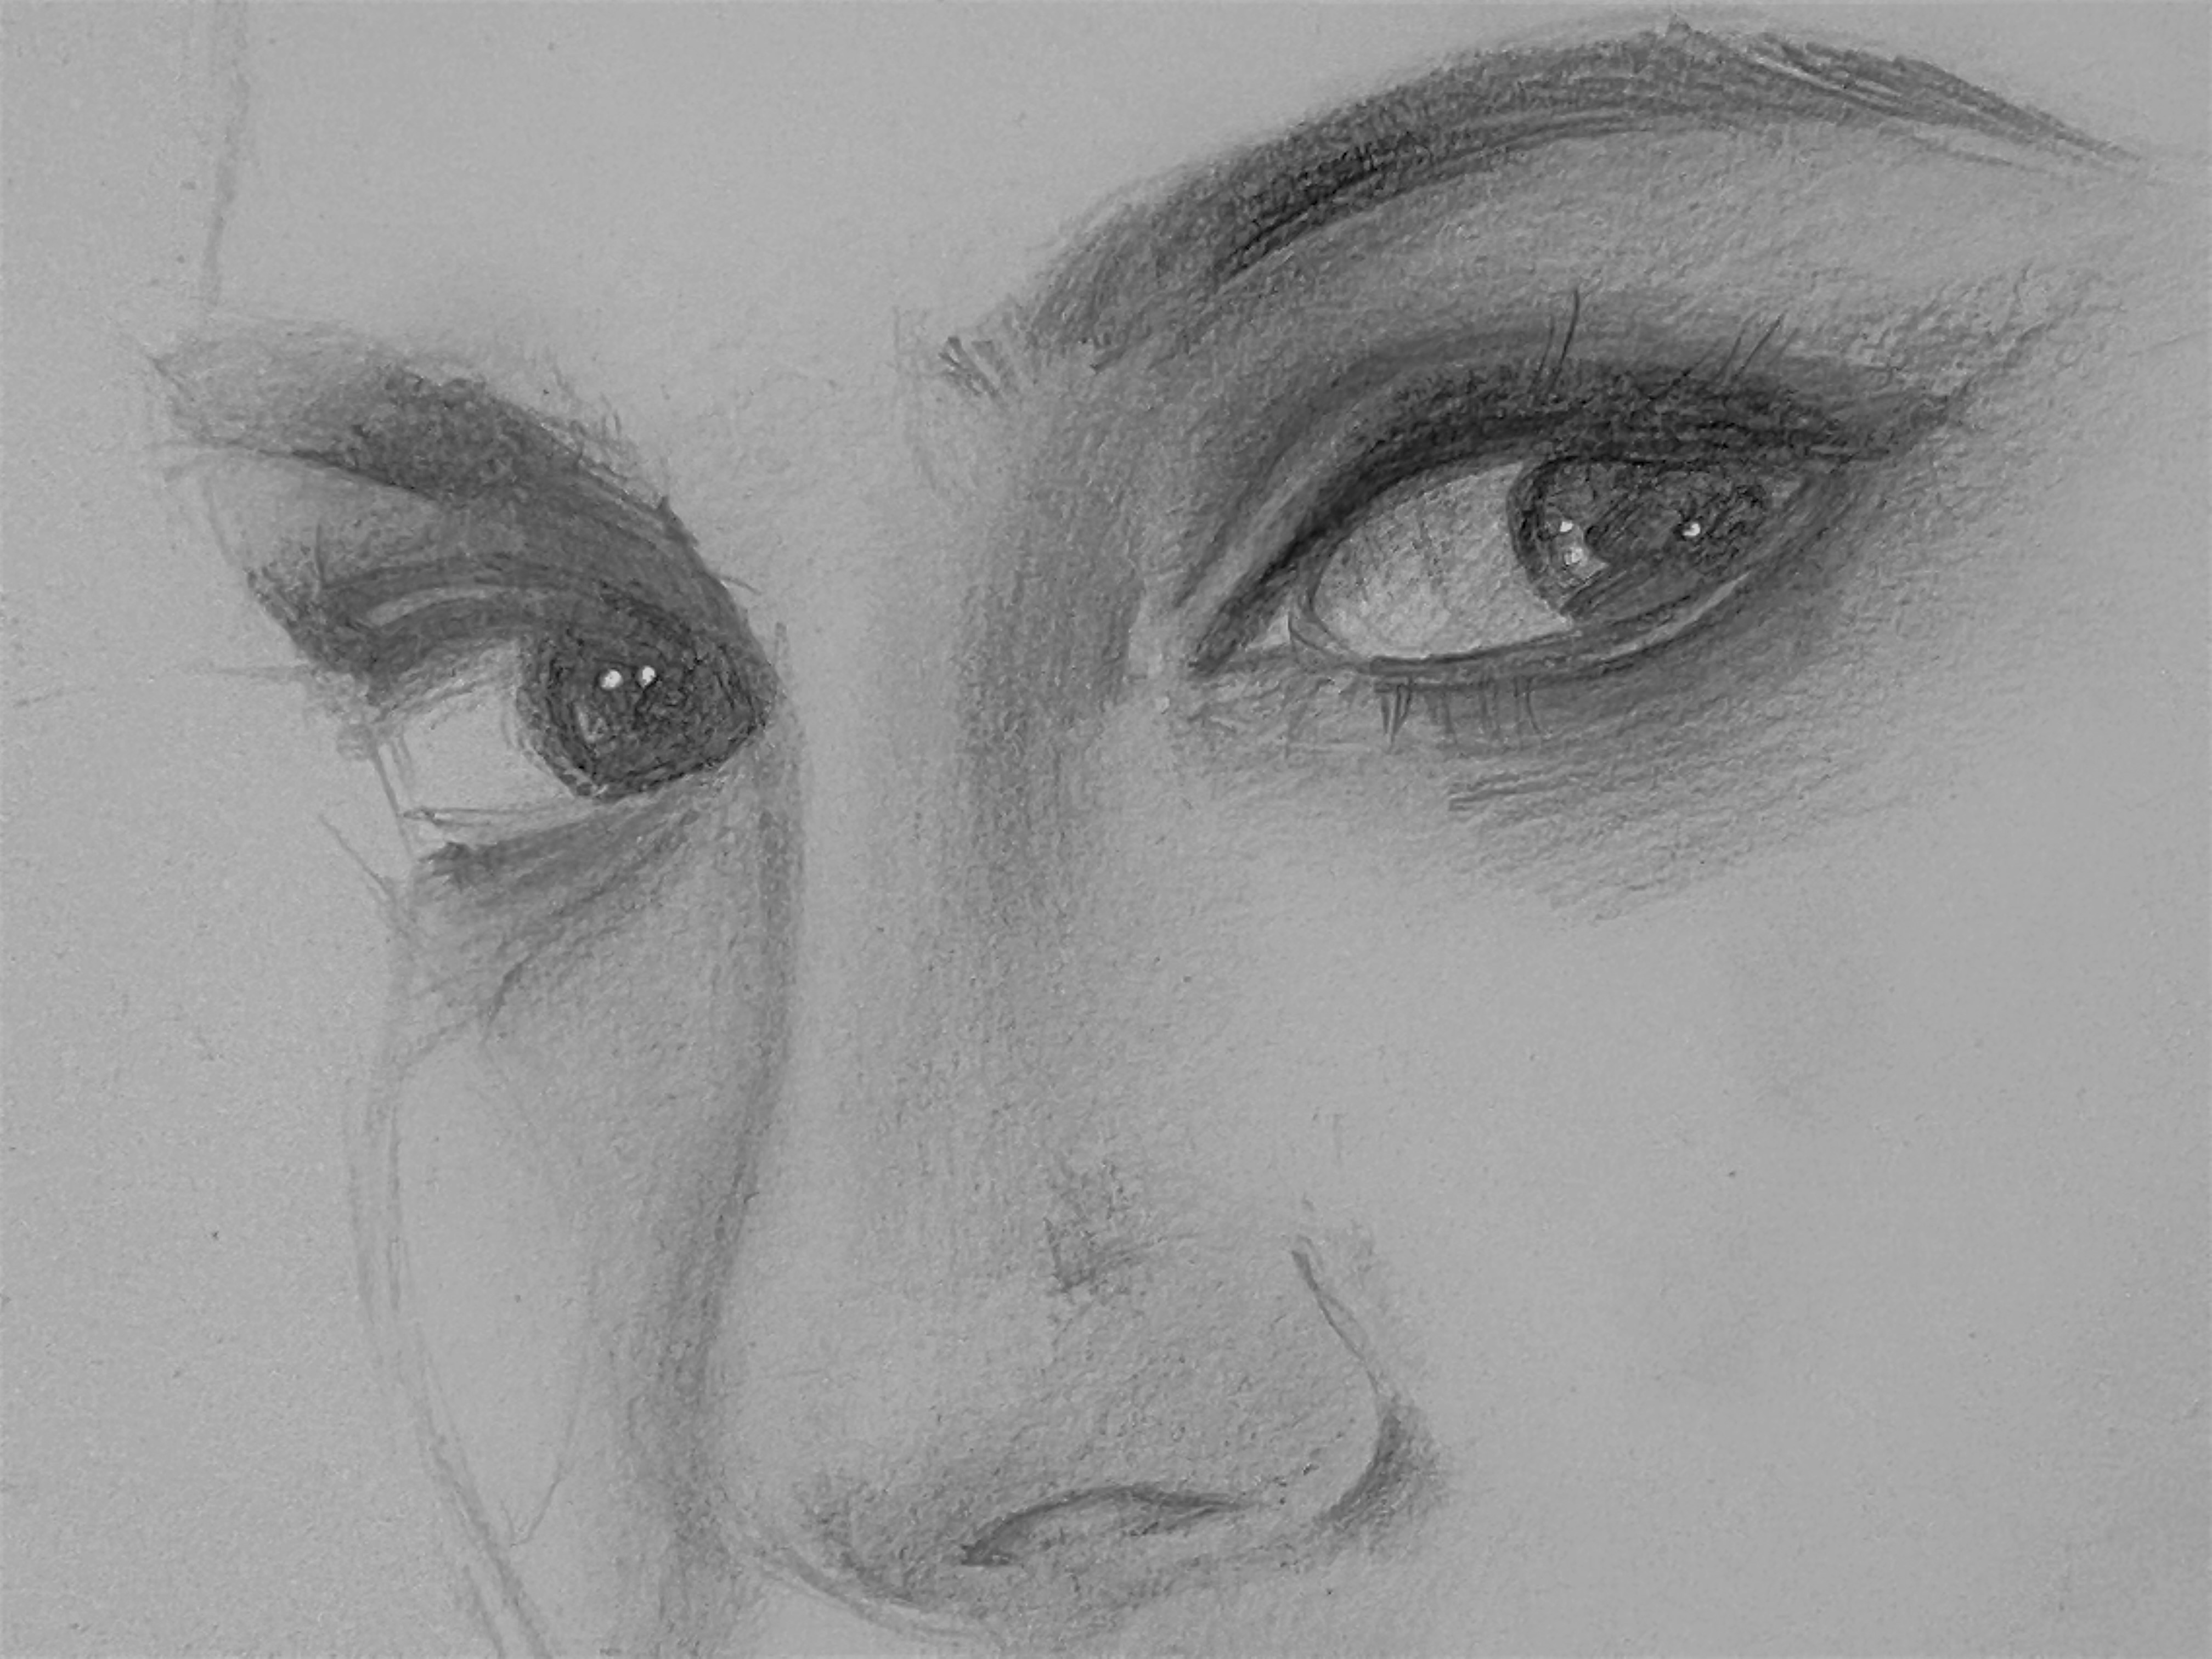 eyes of a girl drawn without using any instruments